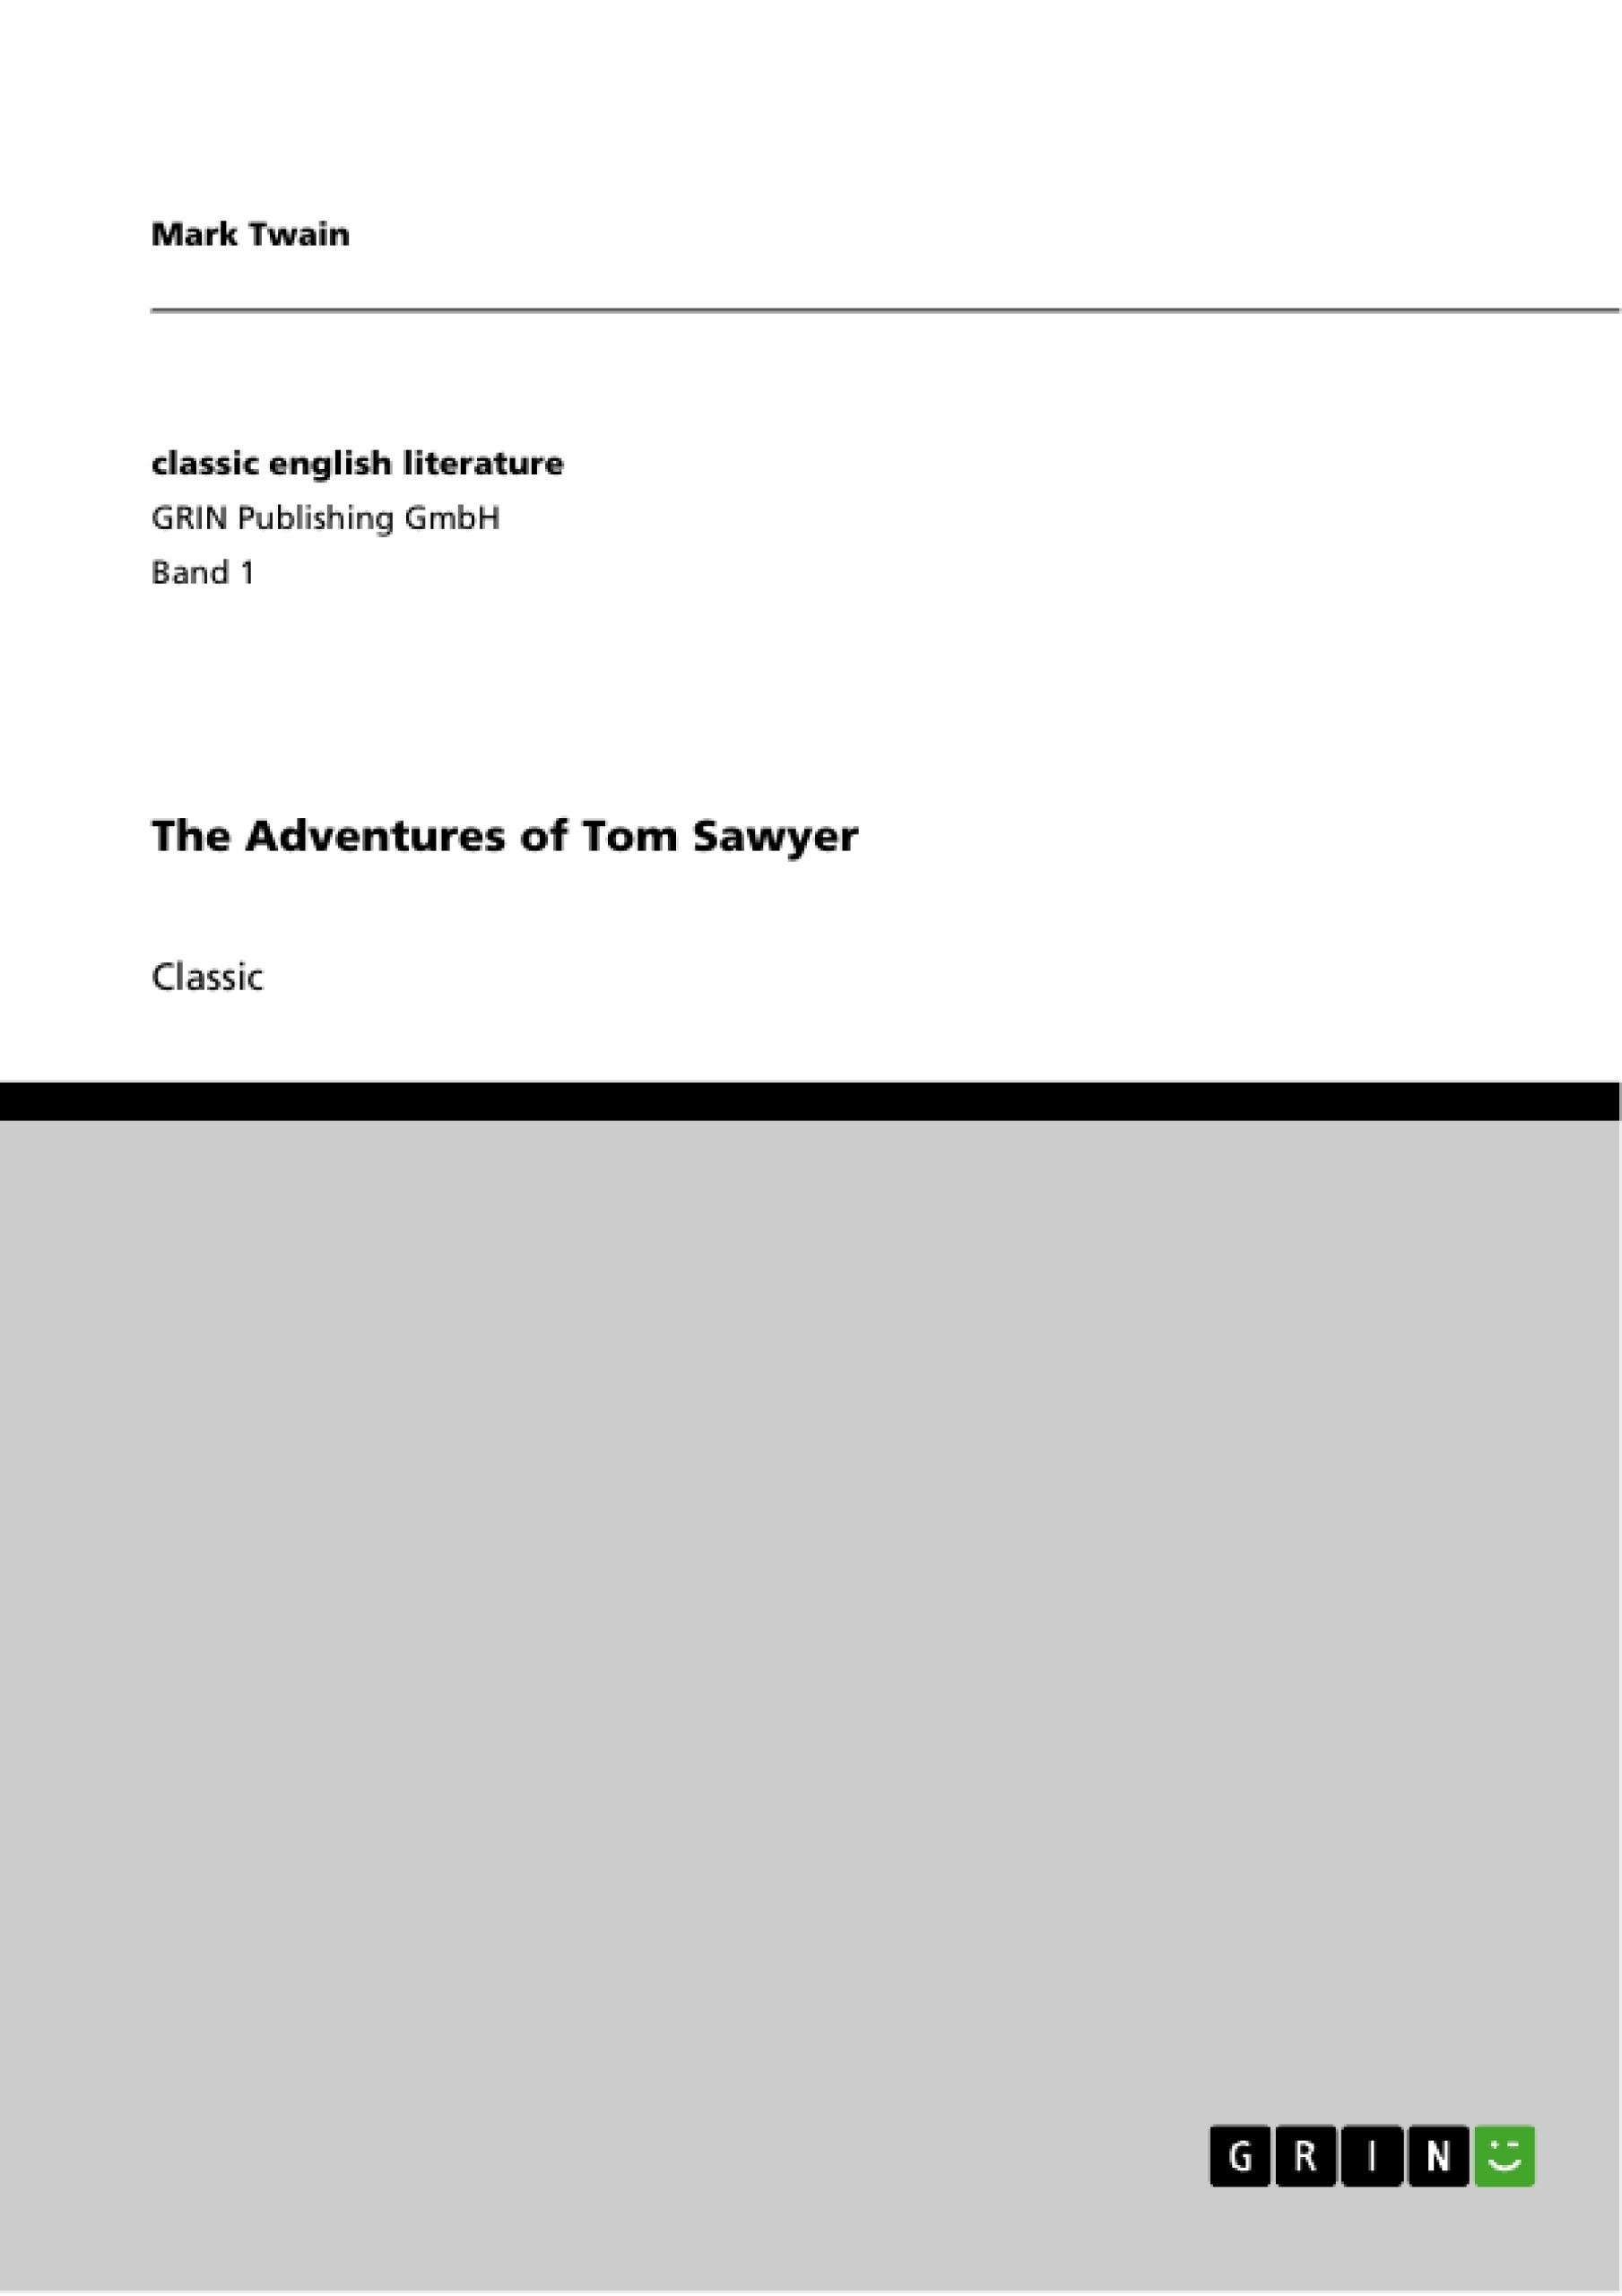 Title: The Adventures of Tom Sawyer